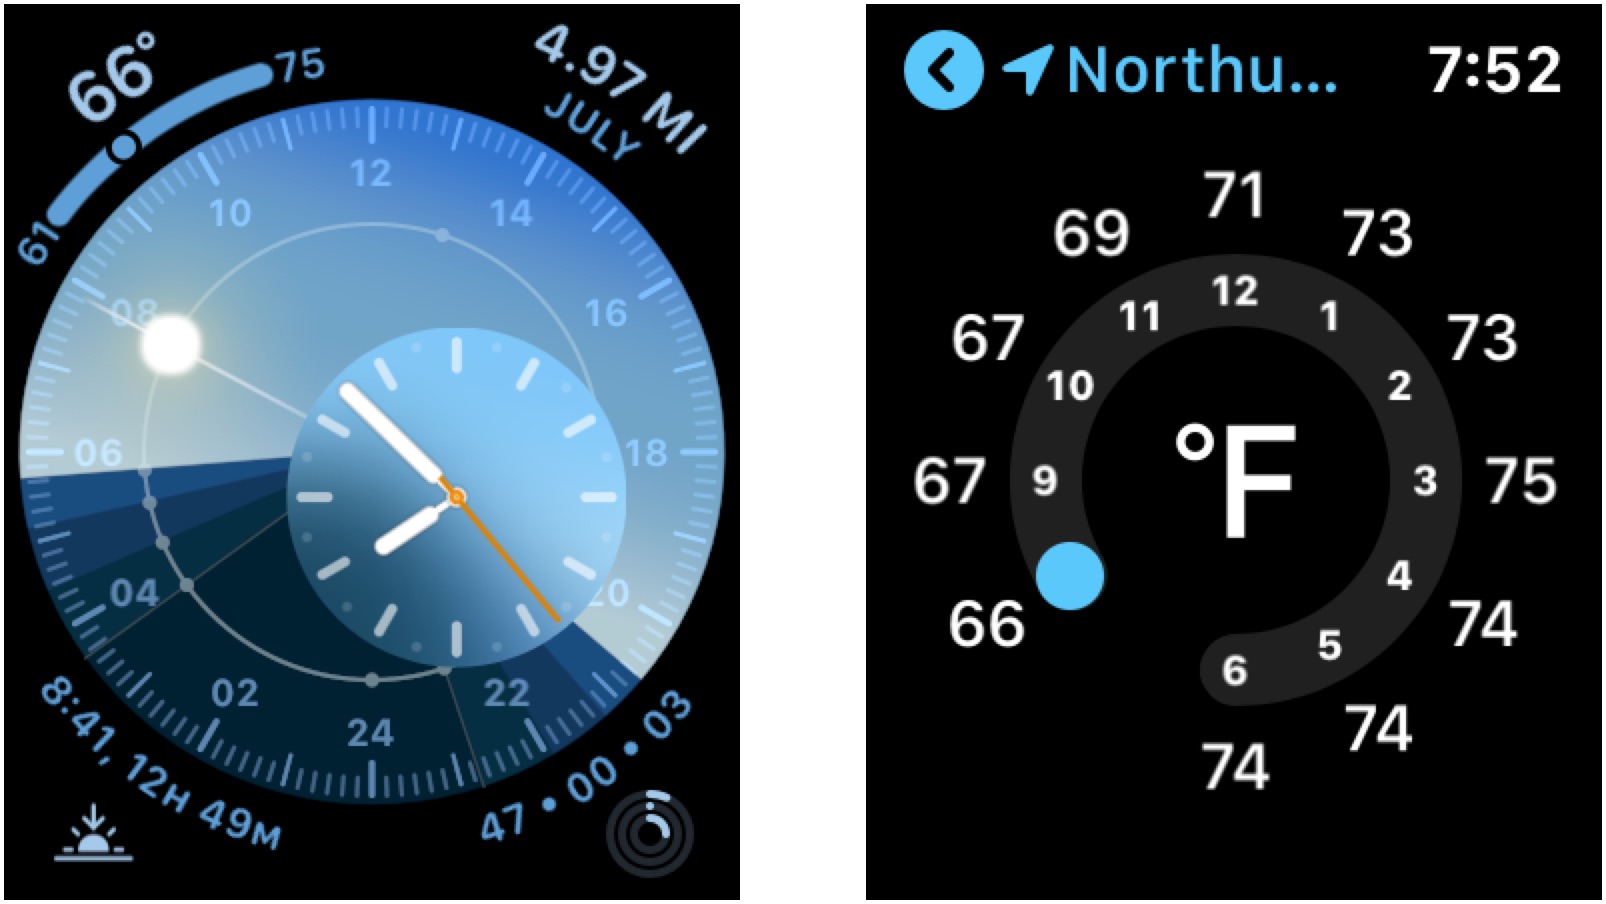 Apple Watch weather complication